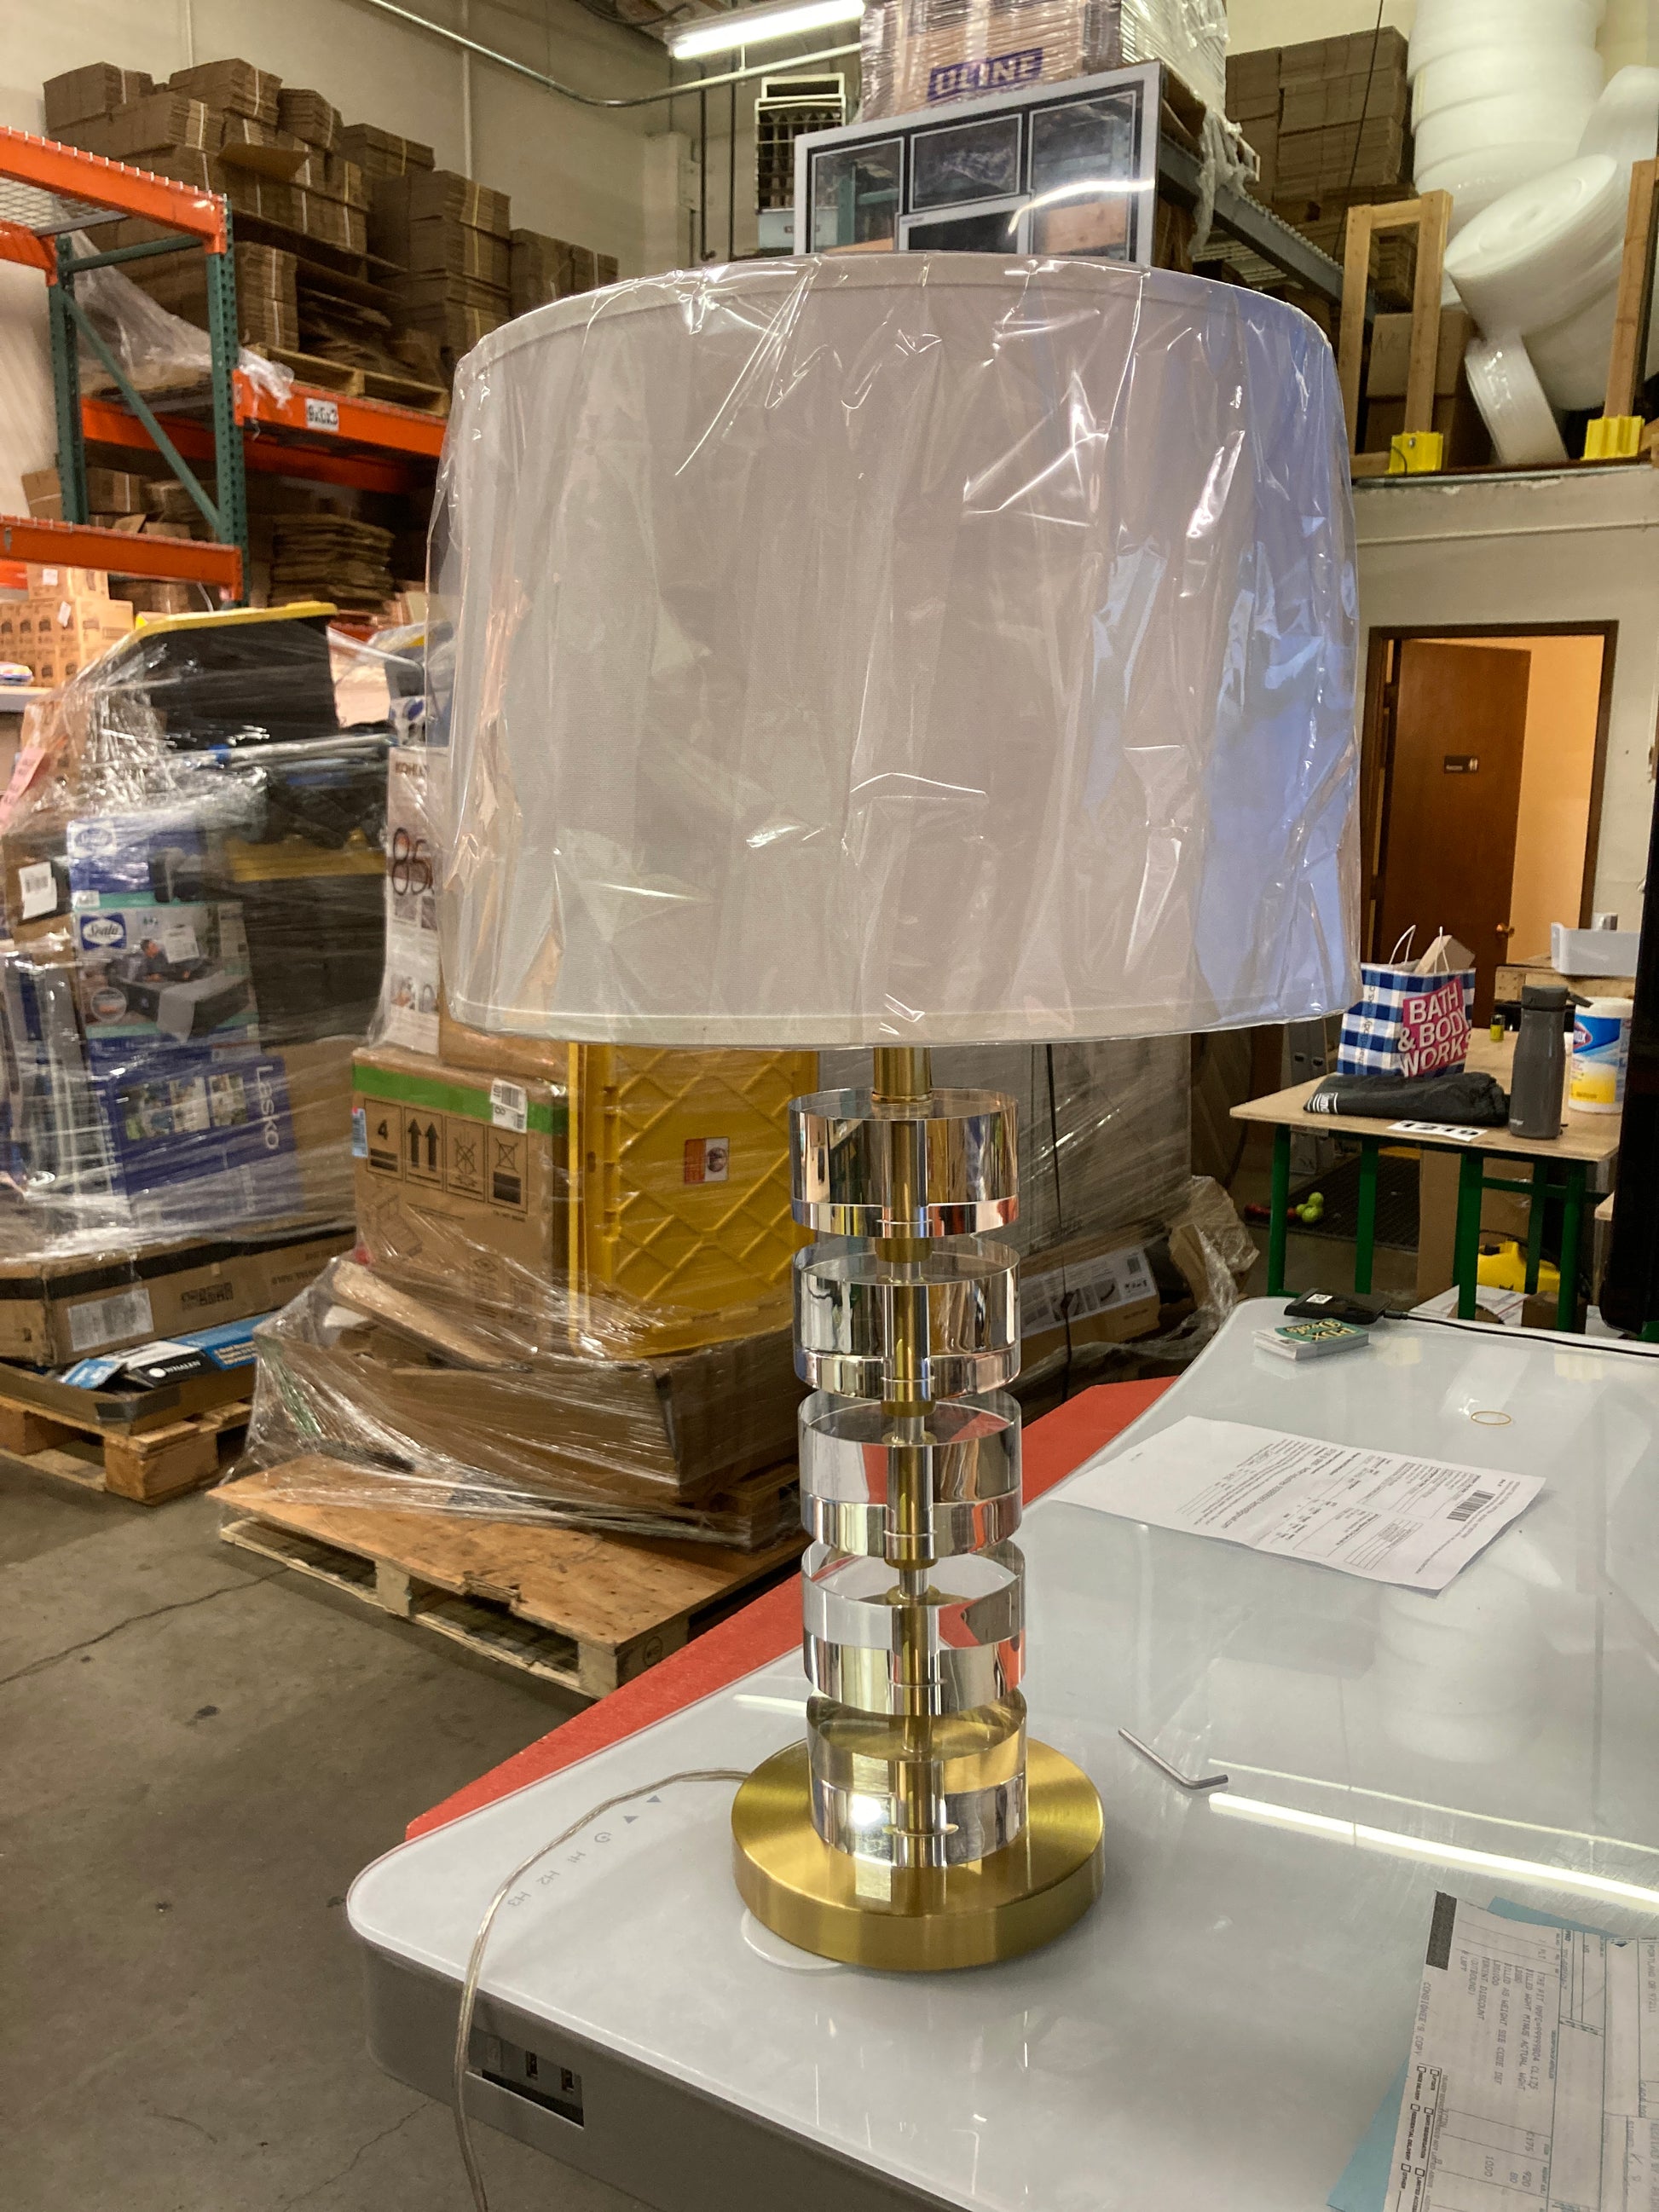 Costco - Bremerton Stacked Table Lamp, 2-pack - Retail $179 Default Title